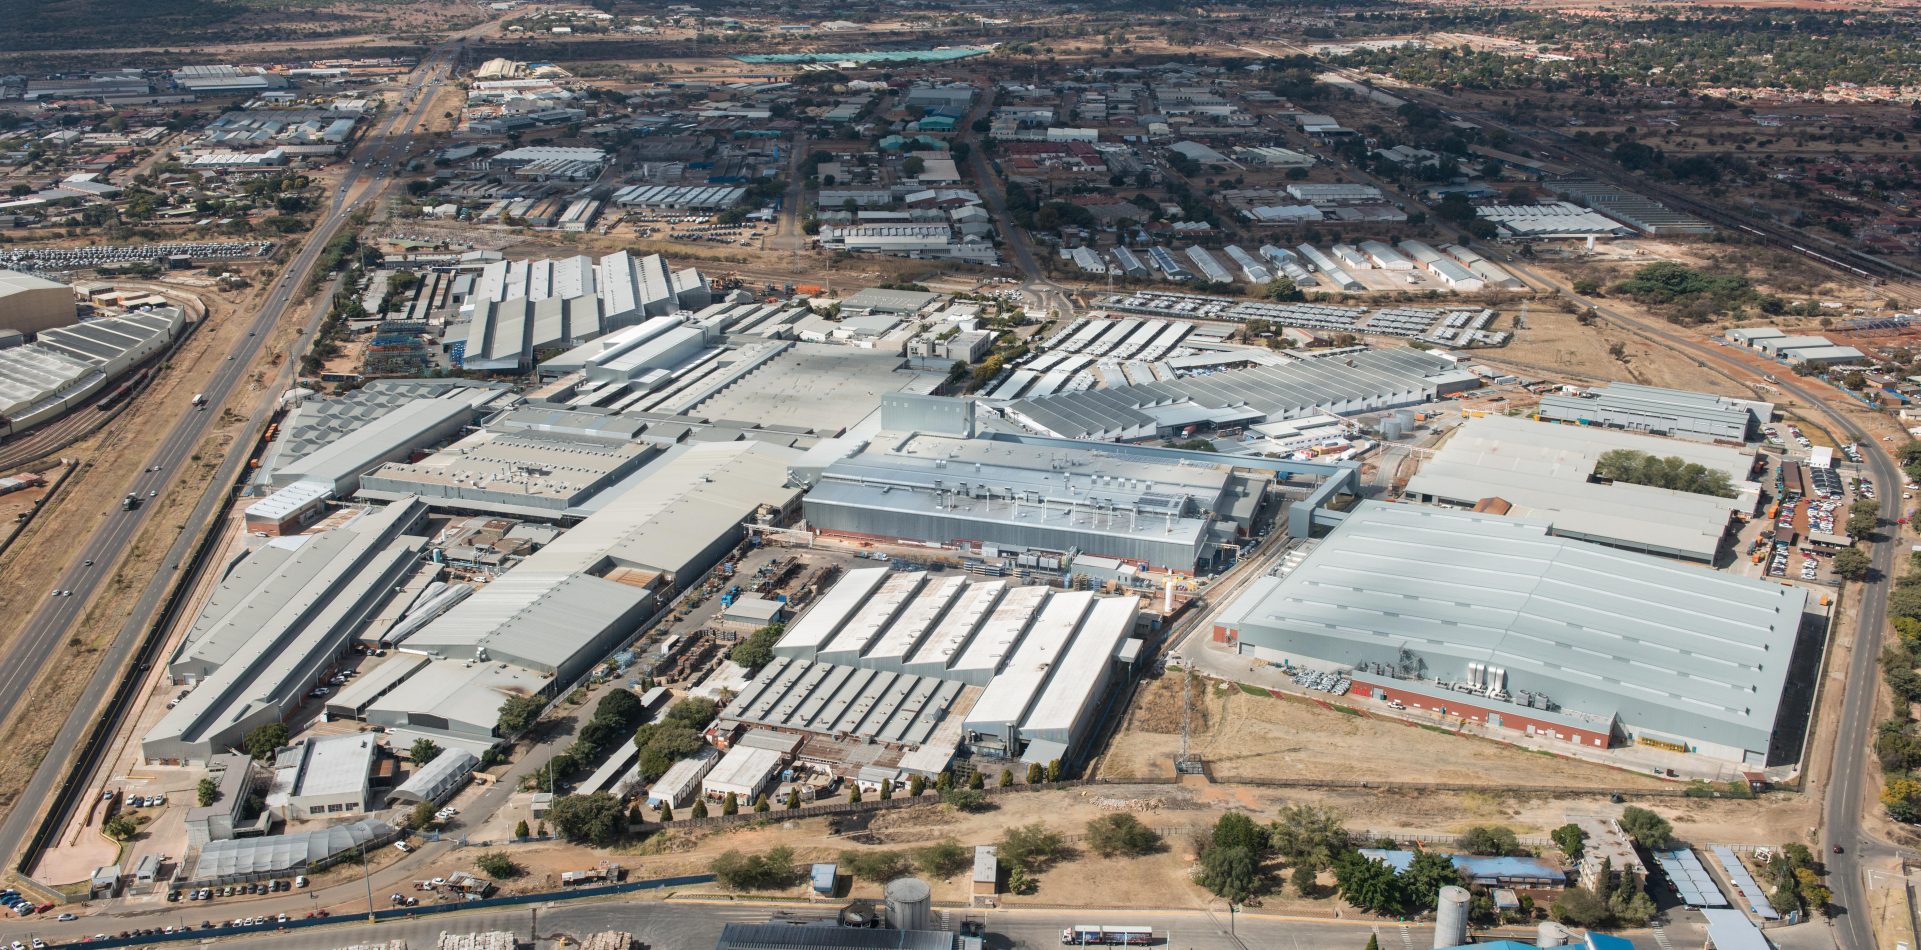 This picture shows an aerial view of the Plant Rosslyn.